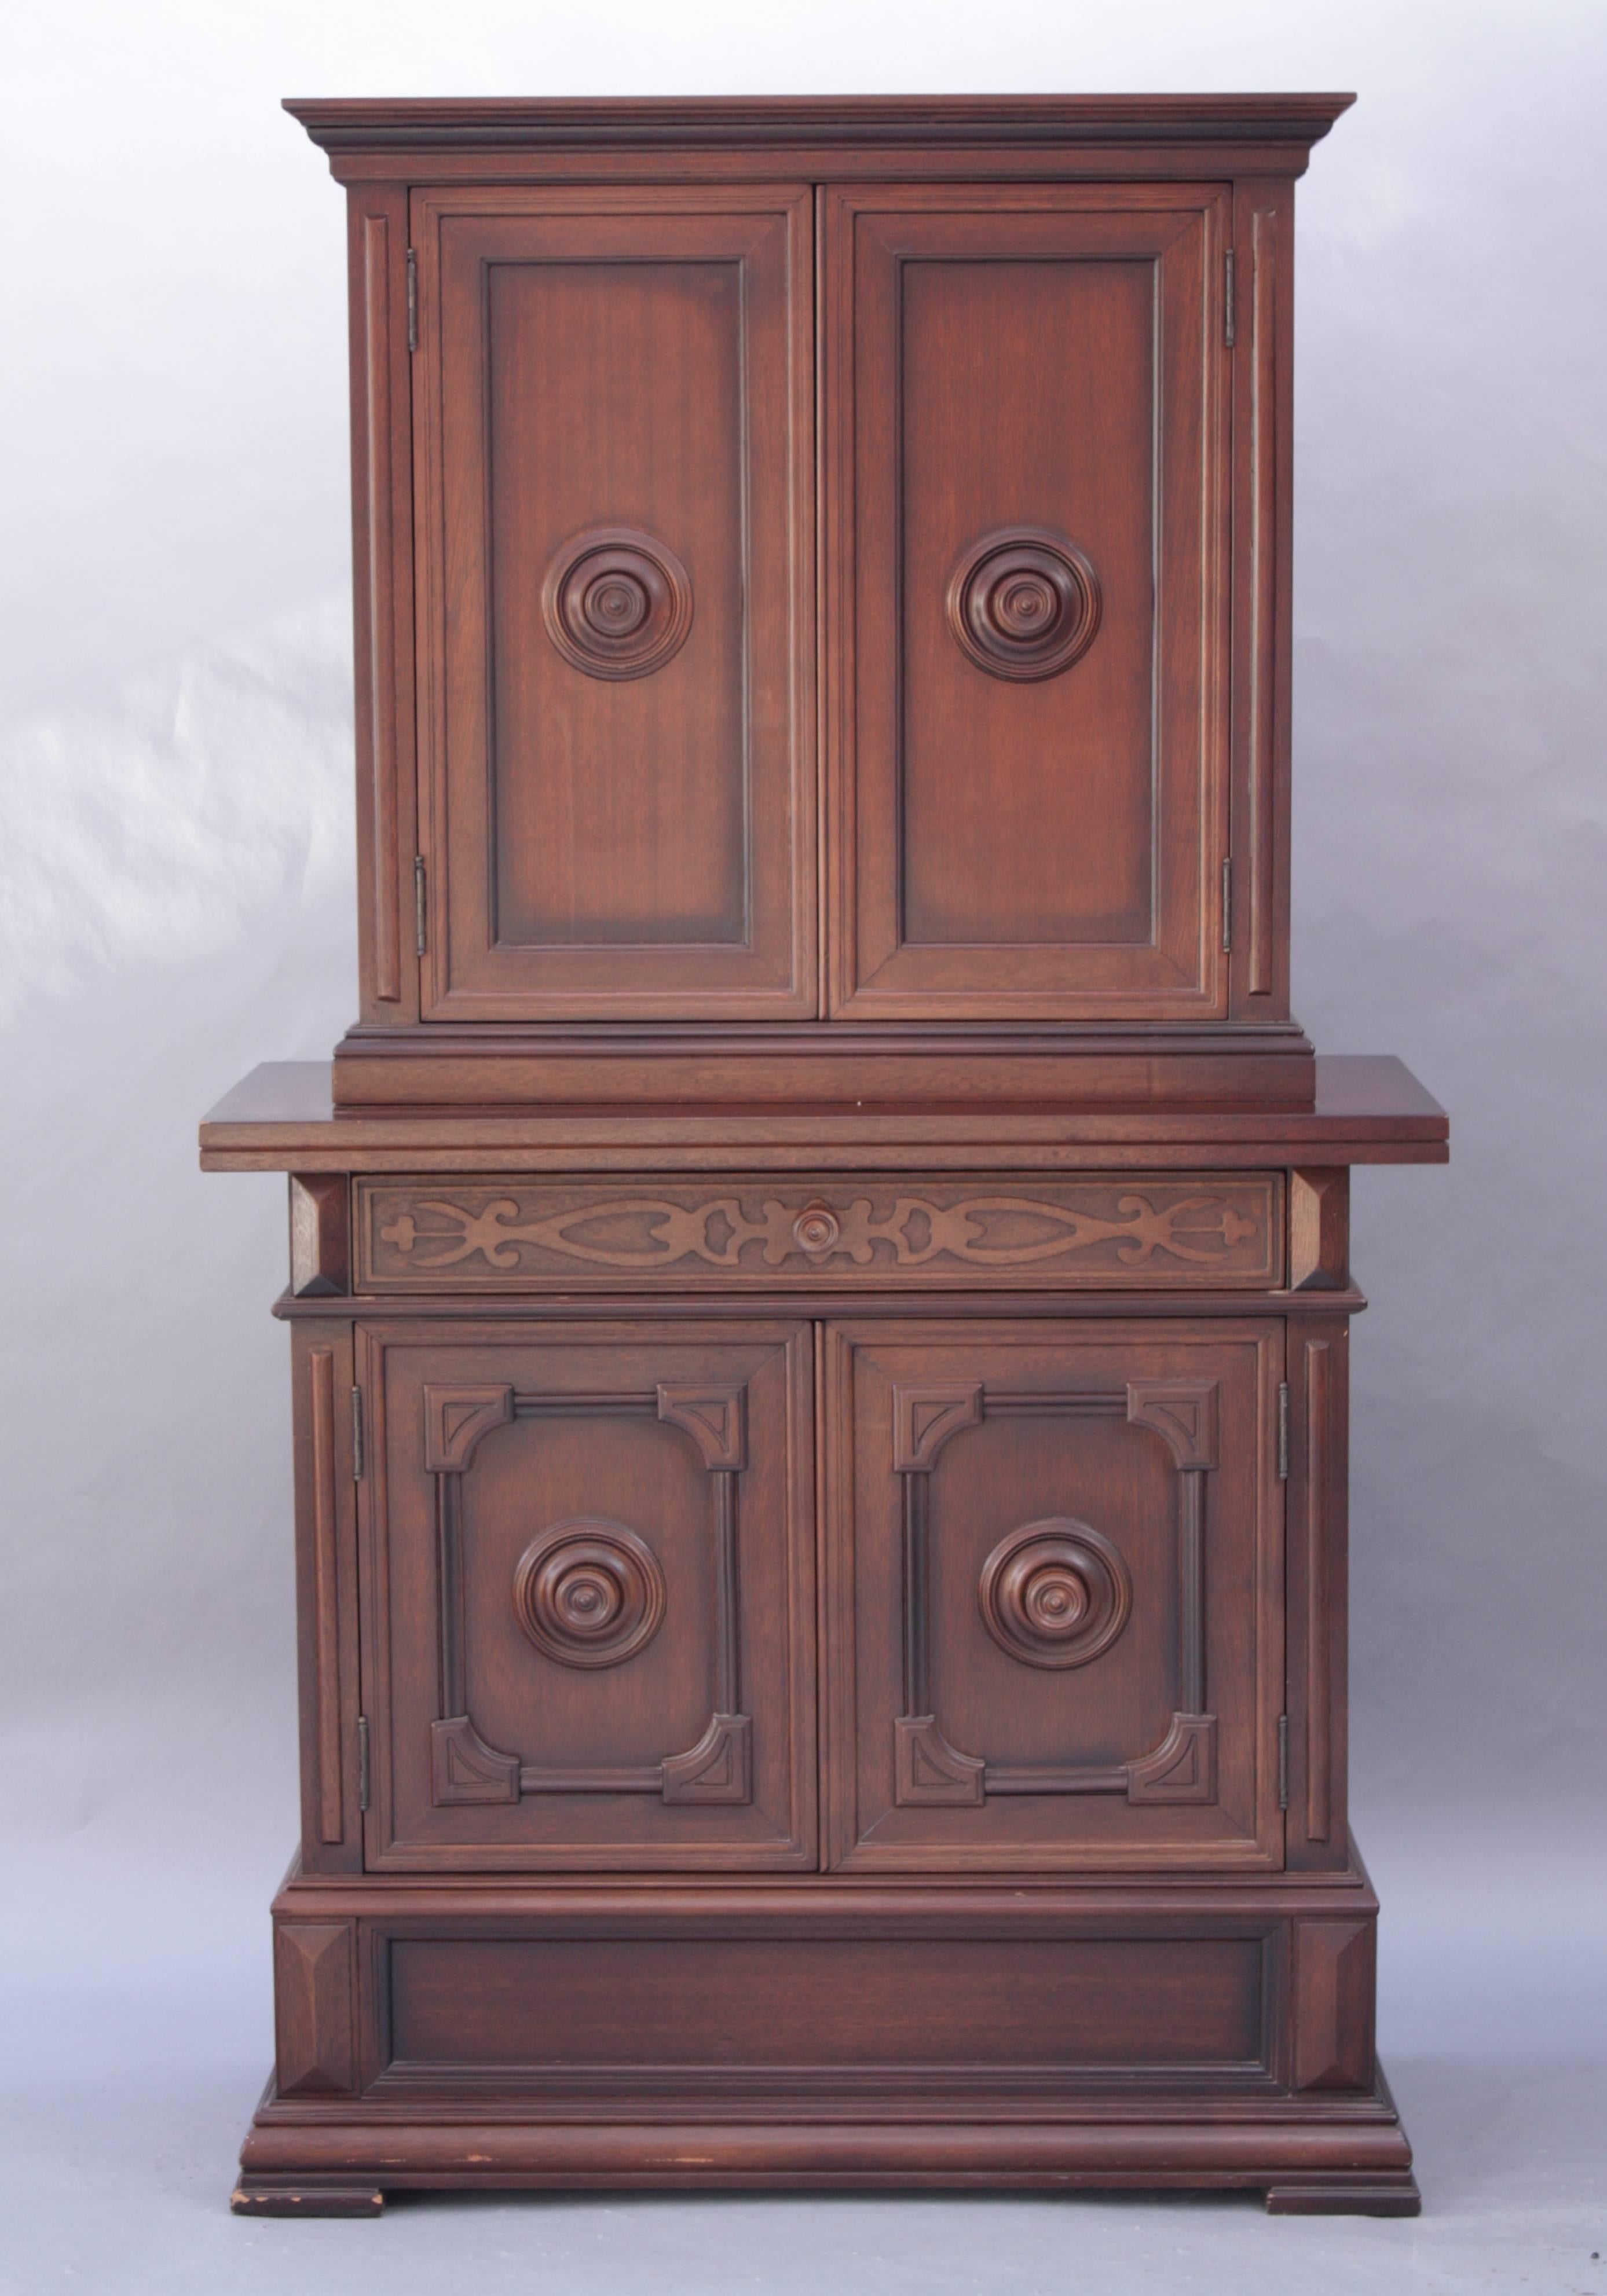 1920s Spanish Revival cabinet with four large cupboard doors and a single, long drawer.